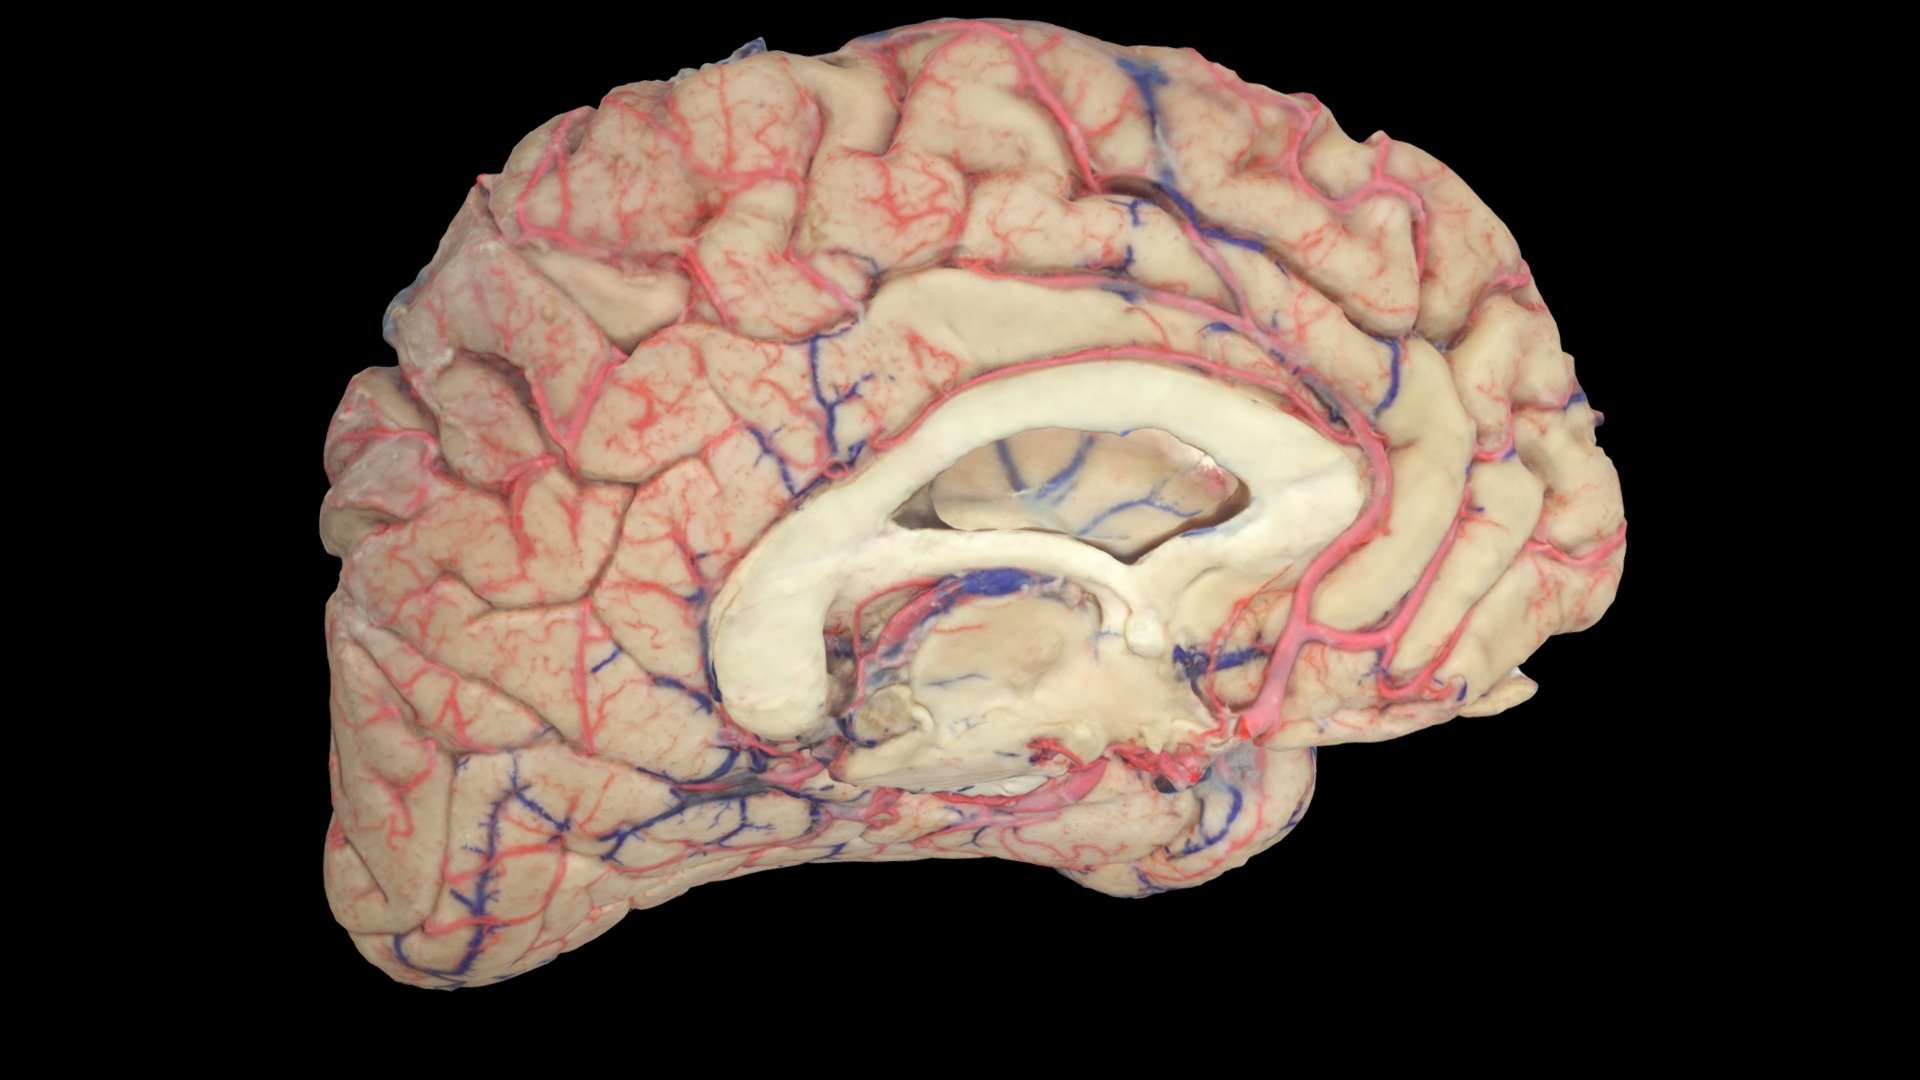 Medial Surface of the brain